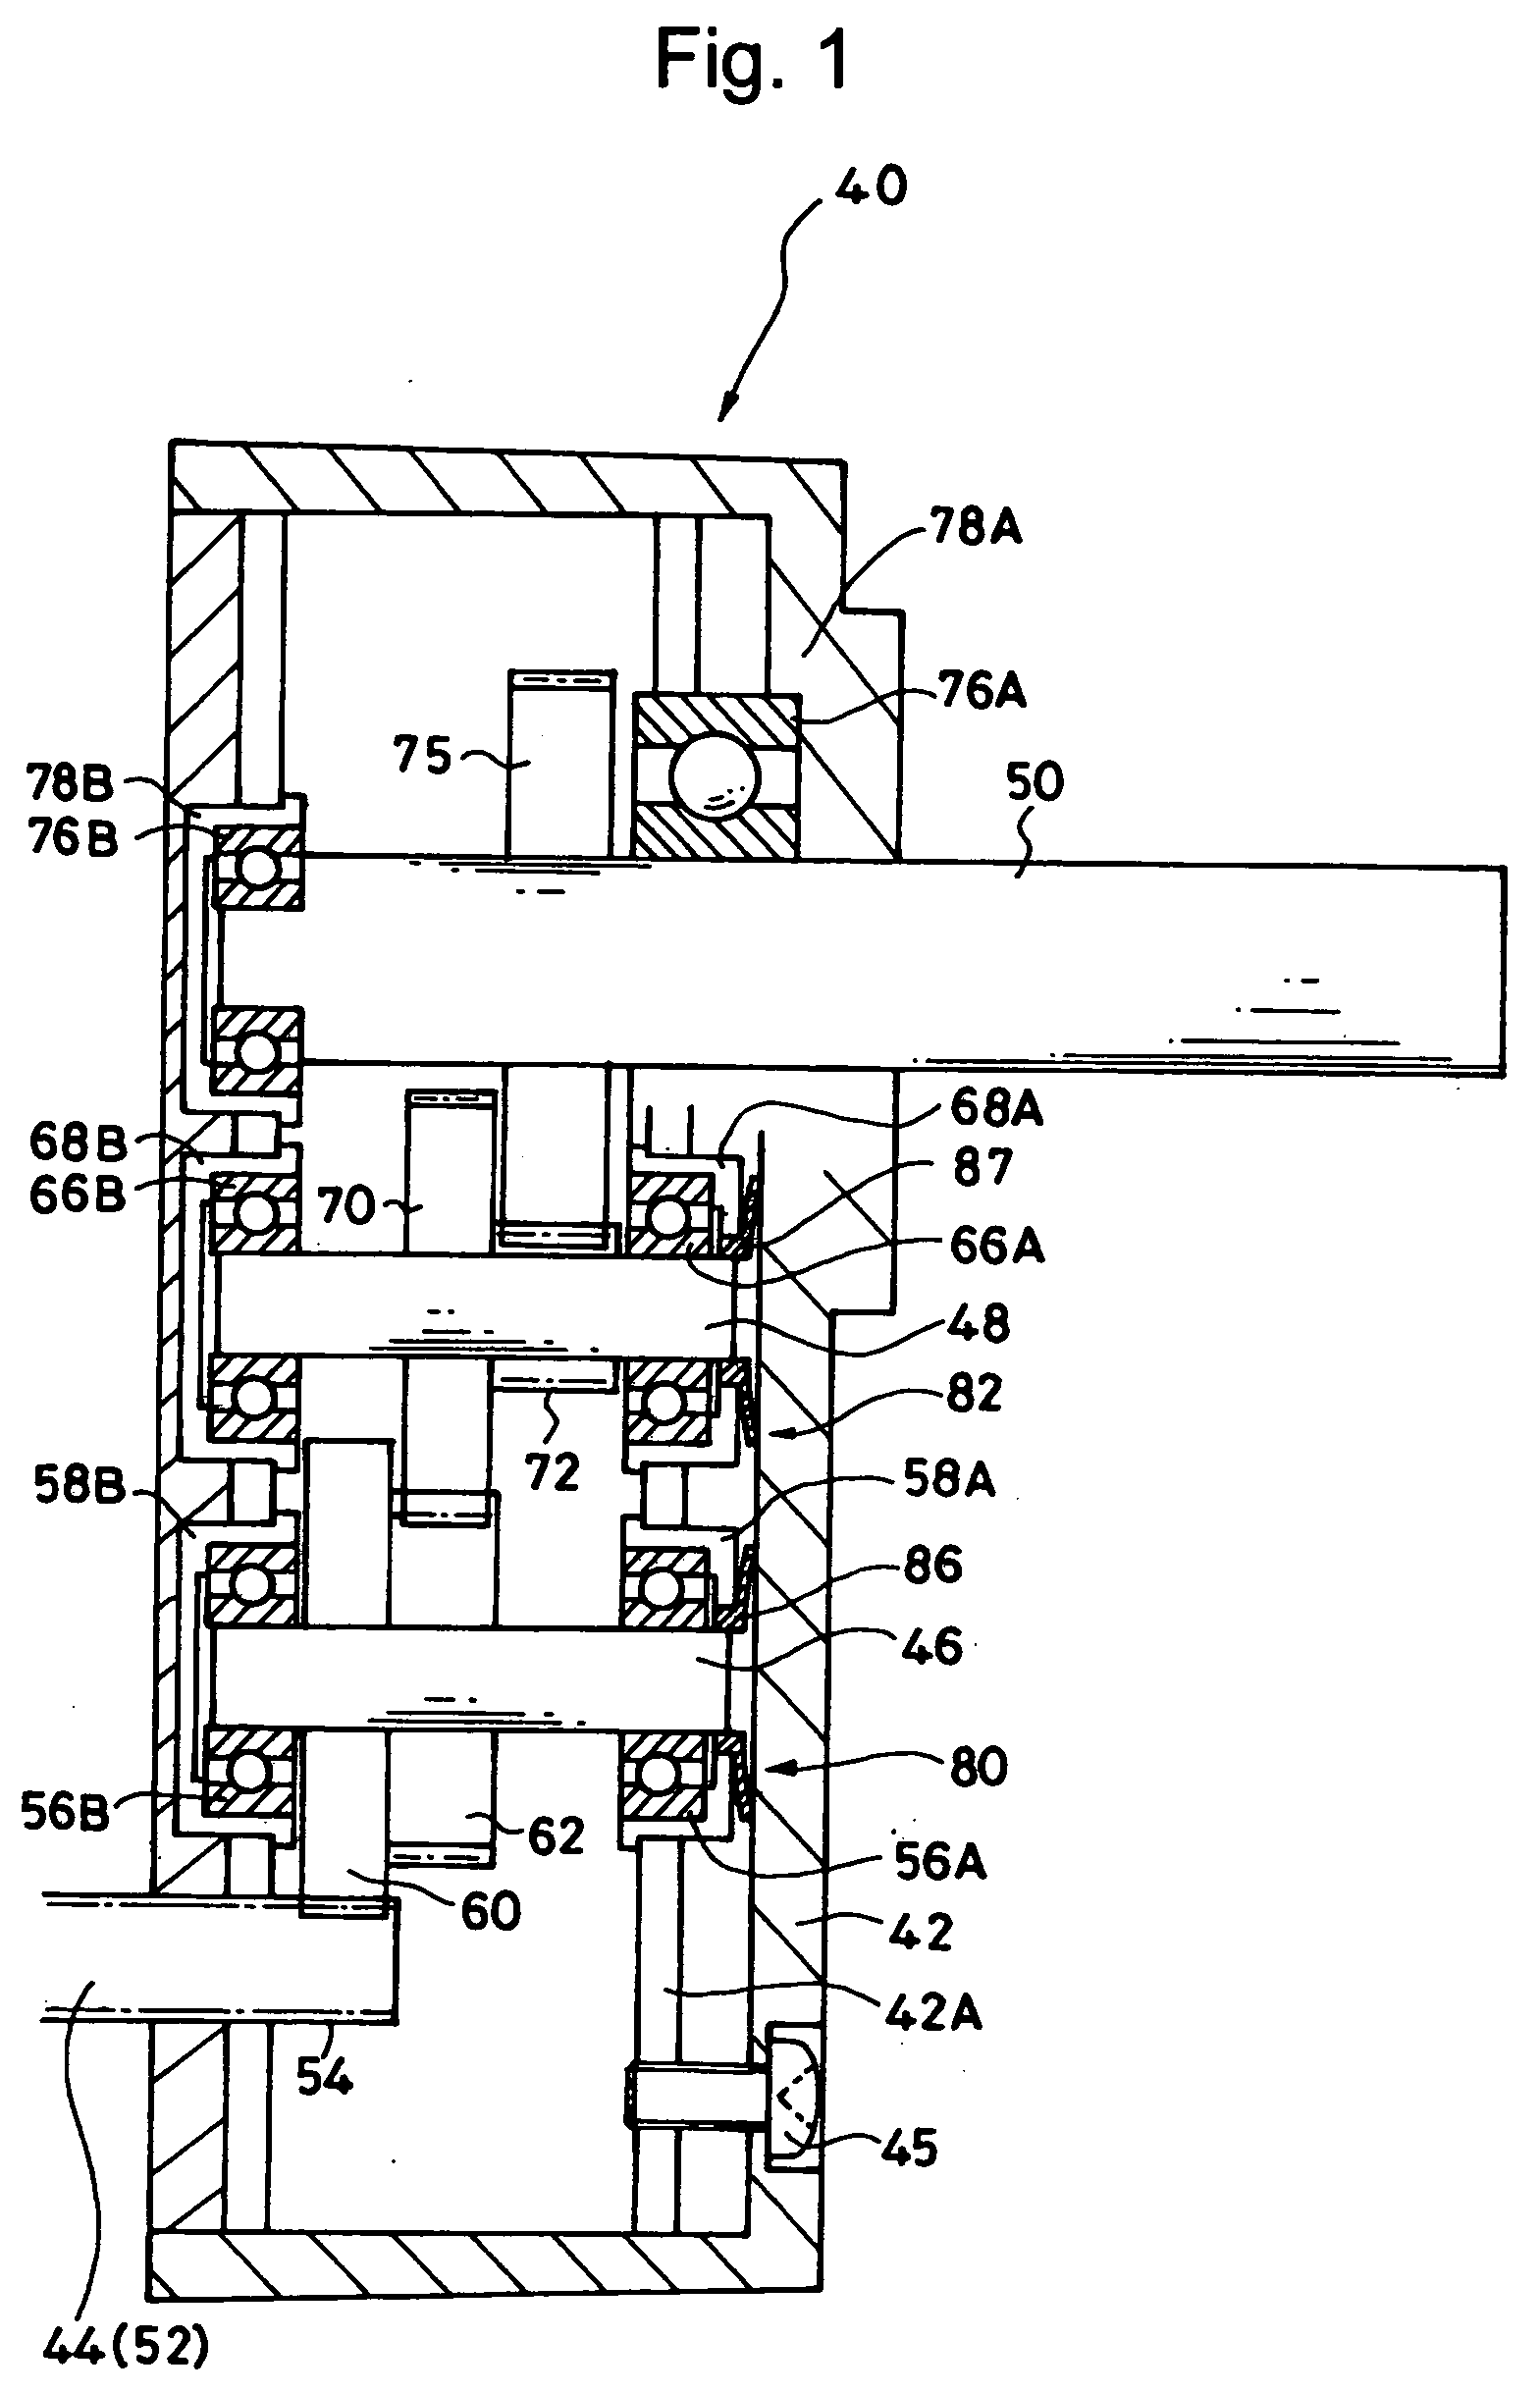 Reduction gear and reduction gear frictional load application member